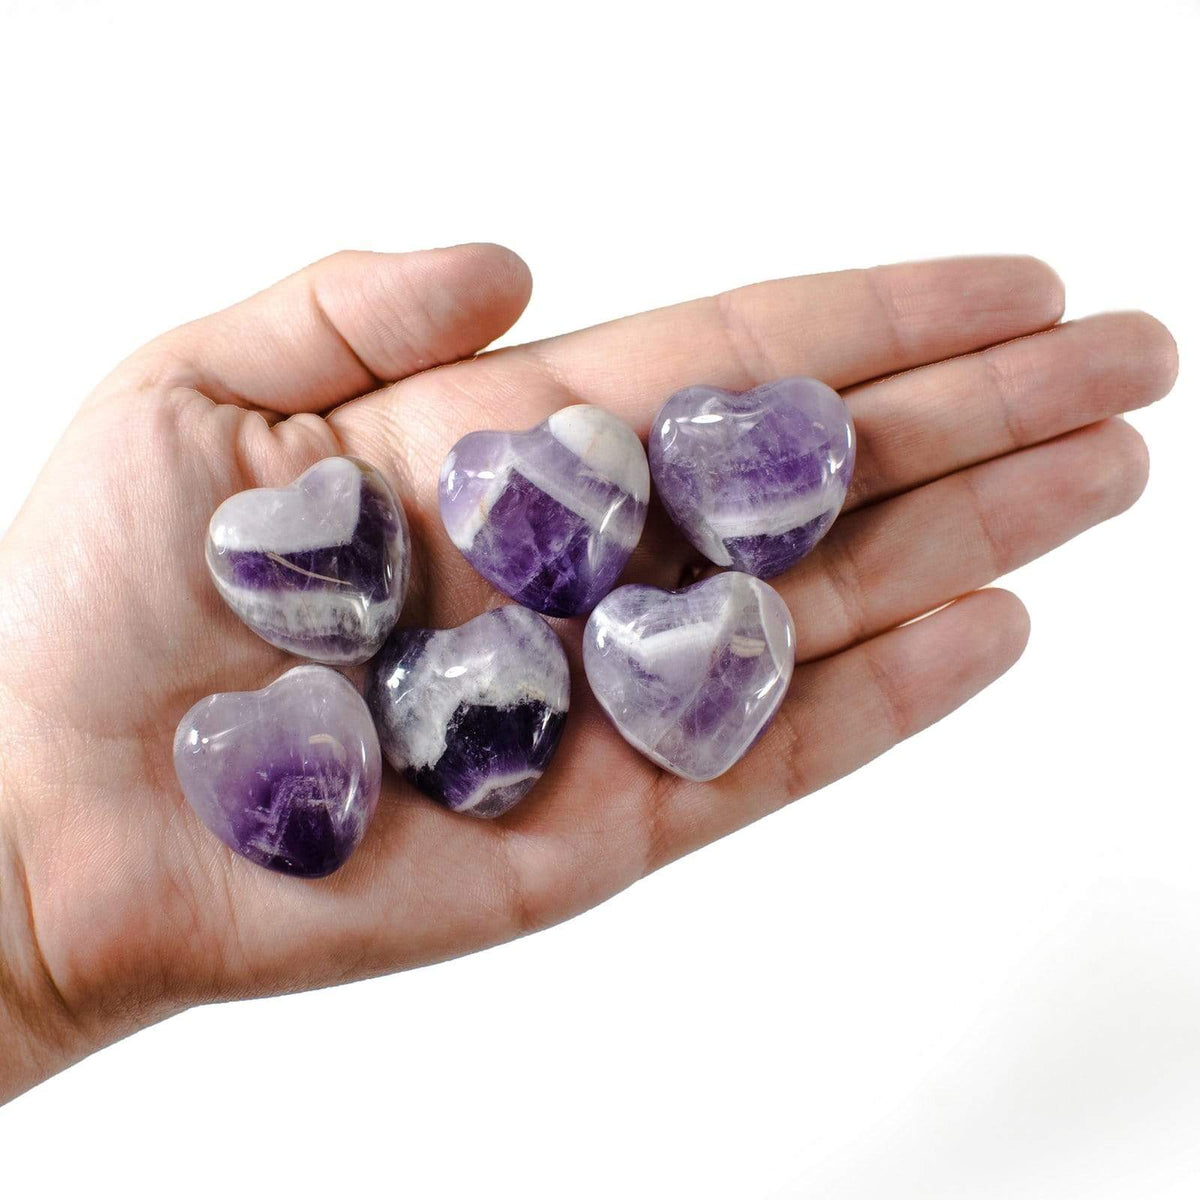 Heart Stone Crystals Variety of Options Dainty Crystals Amethyst